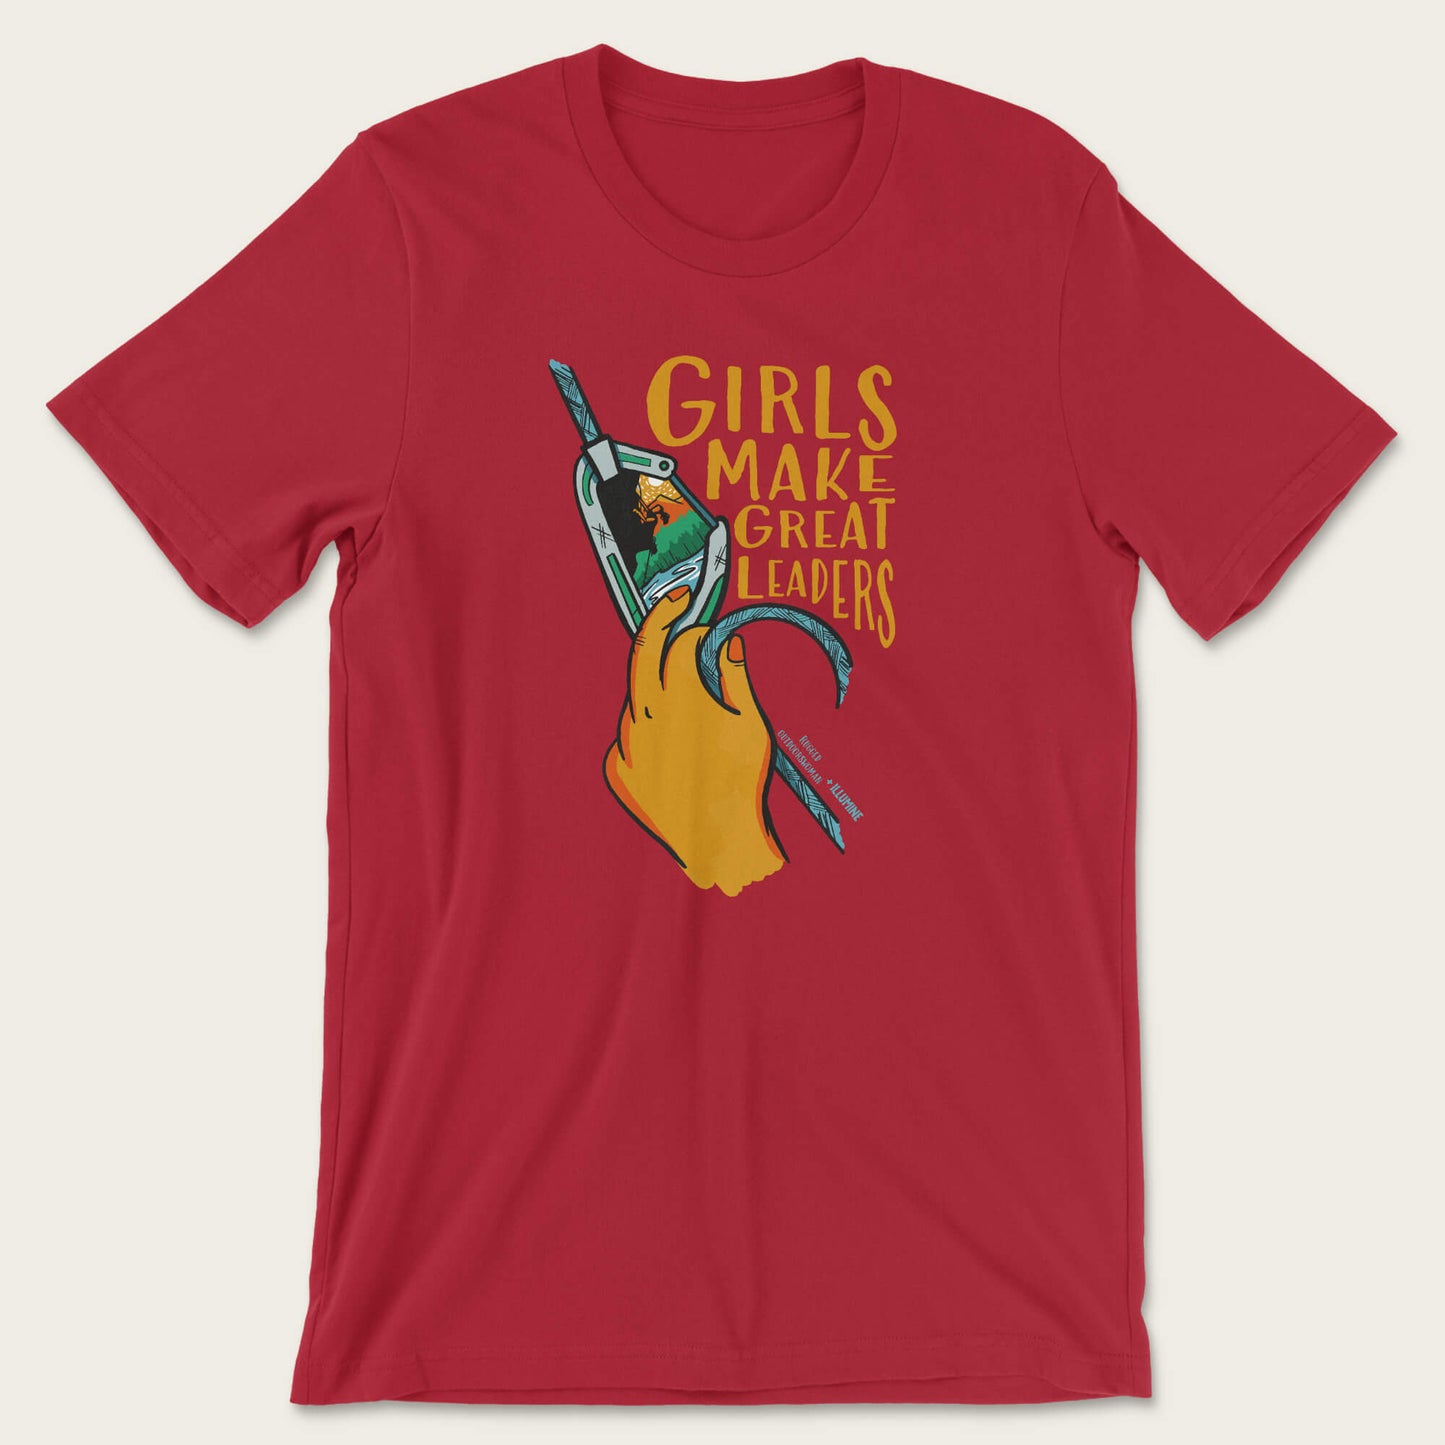 Great Leaders - Rugged Outdoorswoman X Illumine Tee - Canvas Red